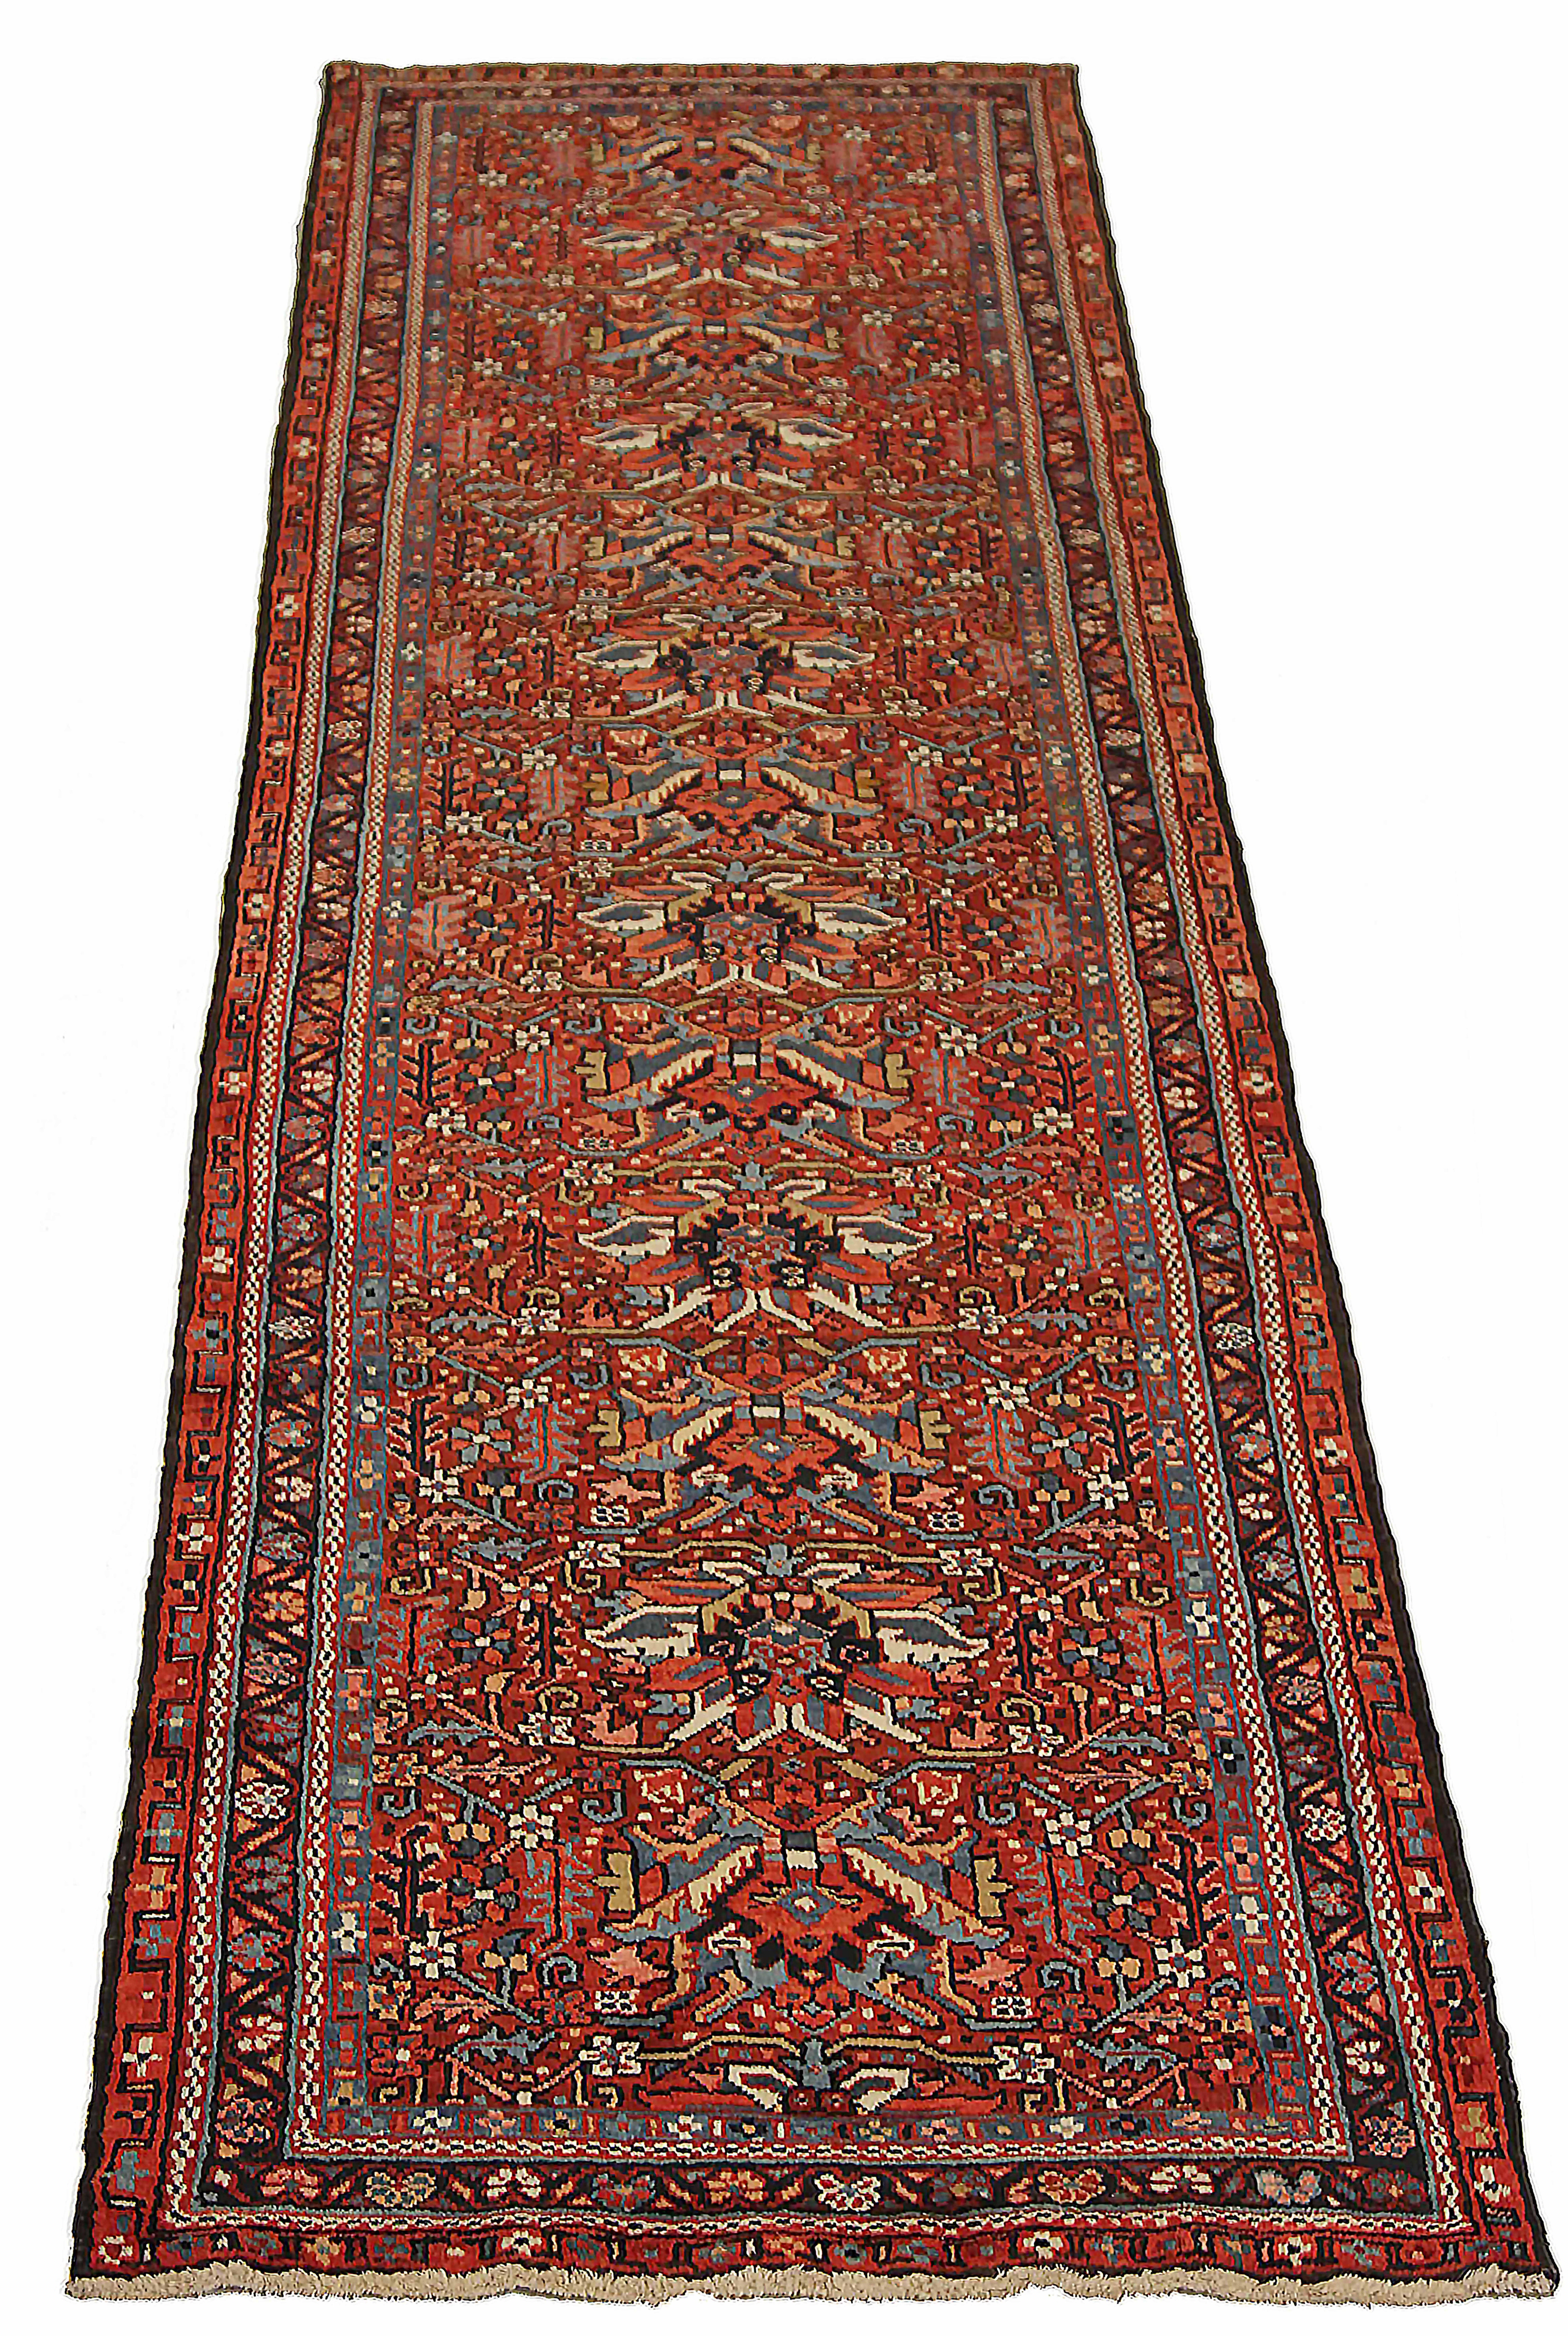 Antique Persian runner rug handwoven from the finest sheep’s wool. It’s colored with all-natural vegetable dyes that are safe for humans and pets. It’s a traditional Karajeh design handwoven by expert artisans. It’s a lovely runner rug that can be